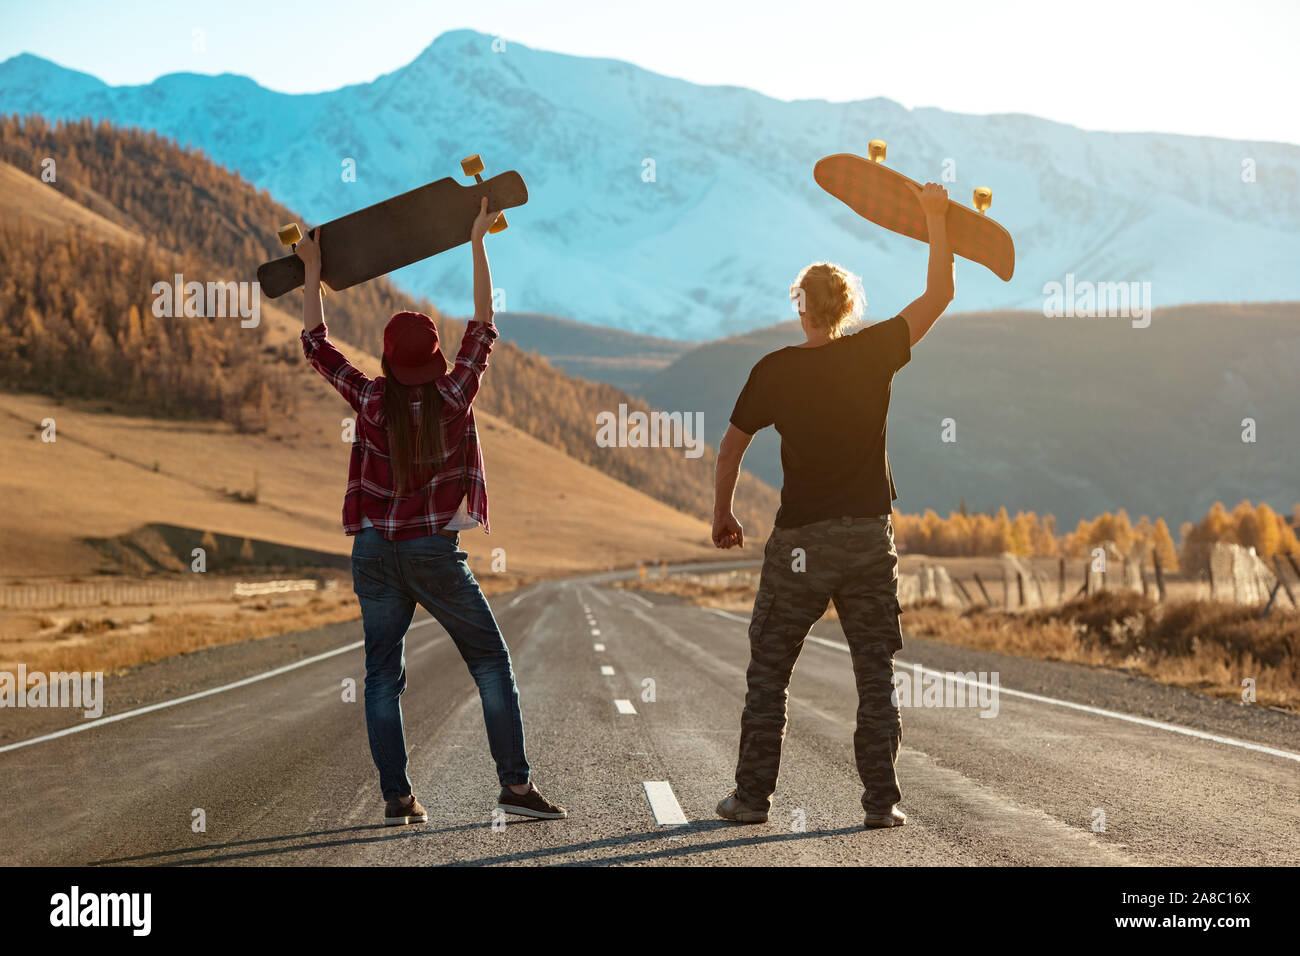 Couple of longboarders stands at straight mountain road with longboard above their heads. Outdoors longboarding concept Stock Photo